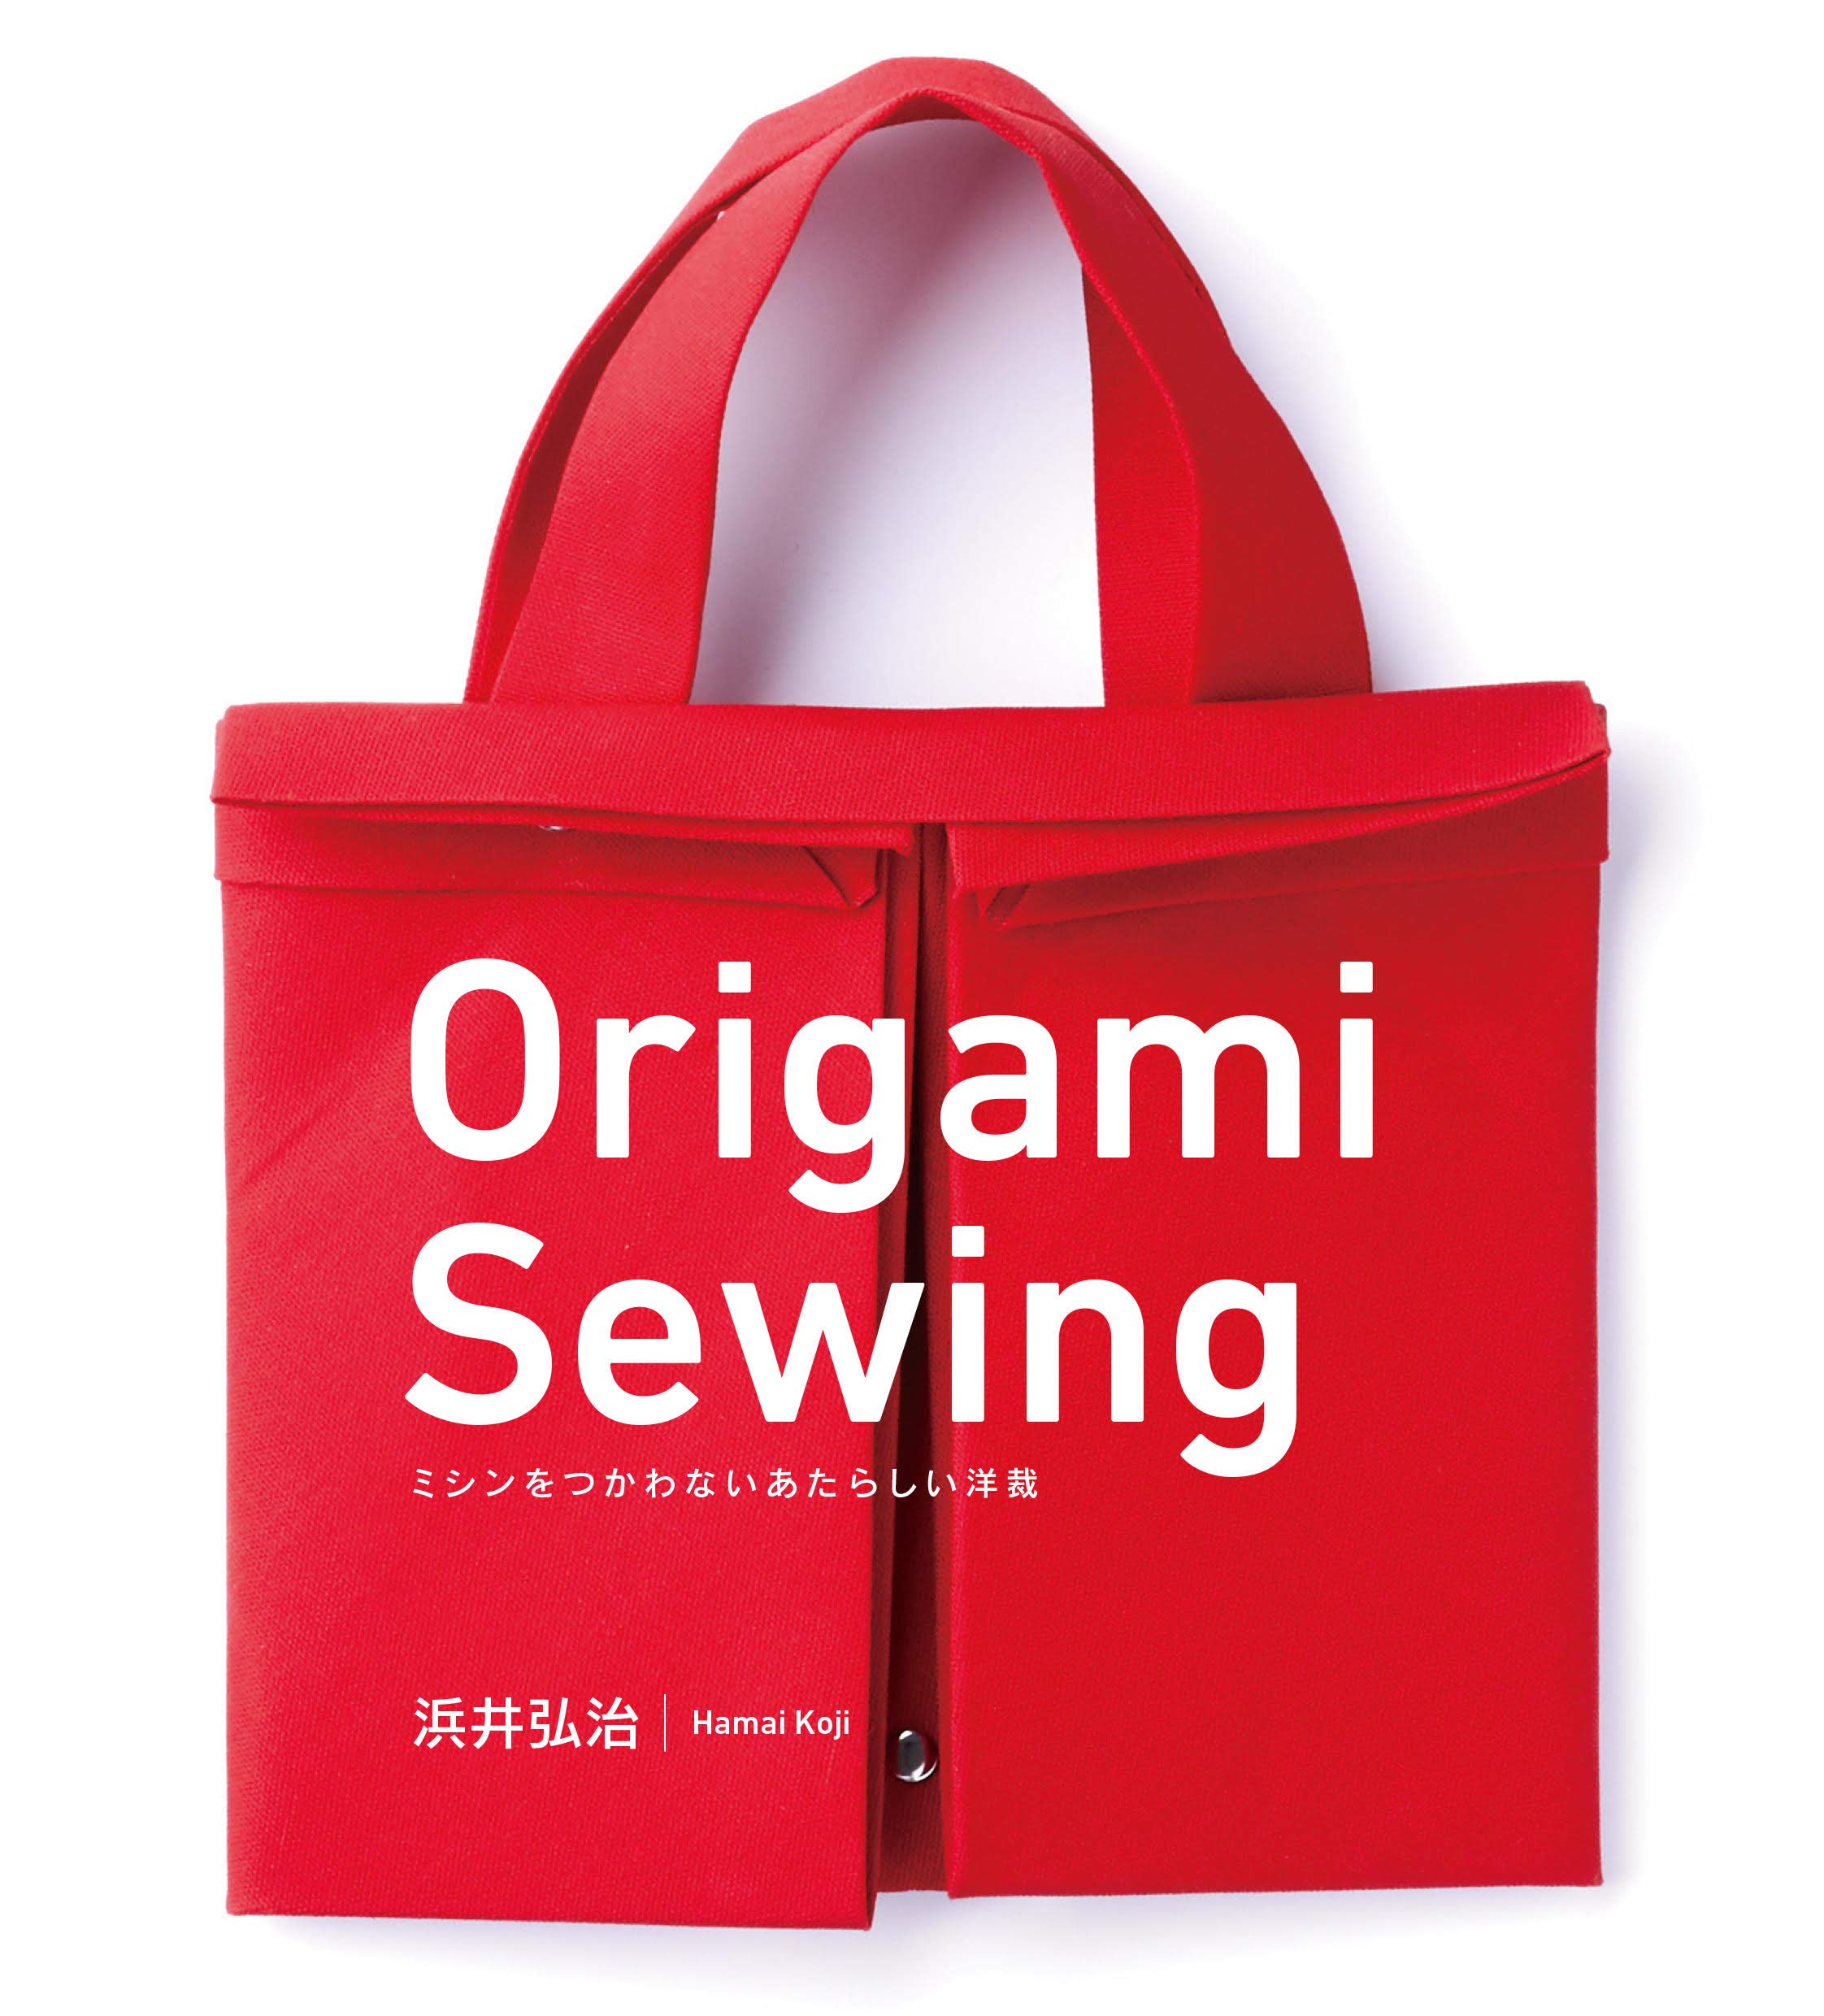 Origami Sewing